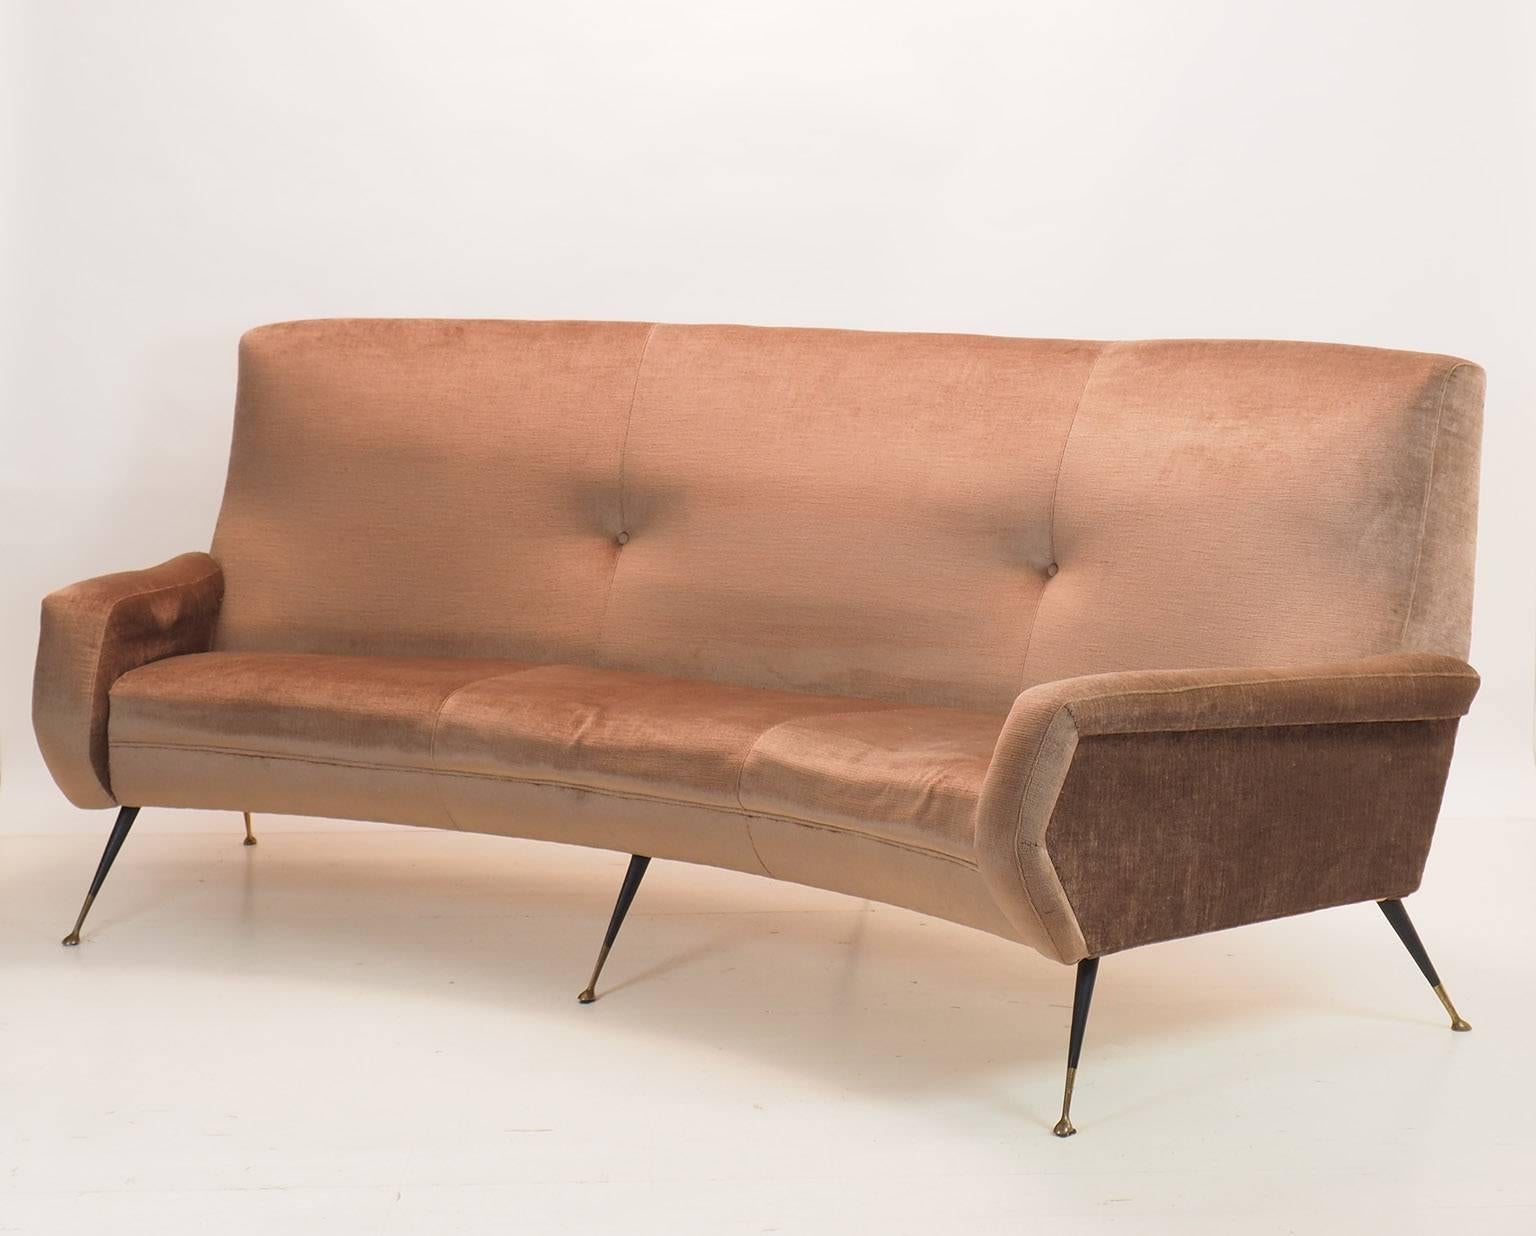 Modern and stylish,
Italian, three-seats curved sofa from Milano, 1950s.
Designer; Gigi Radice, manufactured by Minotti Milano.
Original light brown velvet upholstery in good condition.
Black lacquered metal legs with nice brass feet.
We can